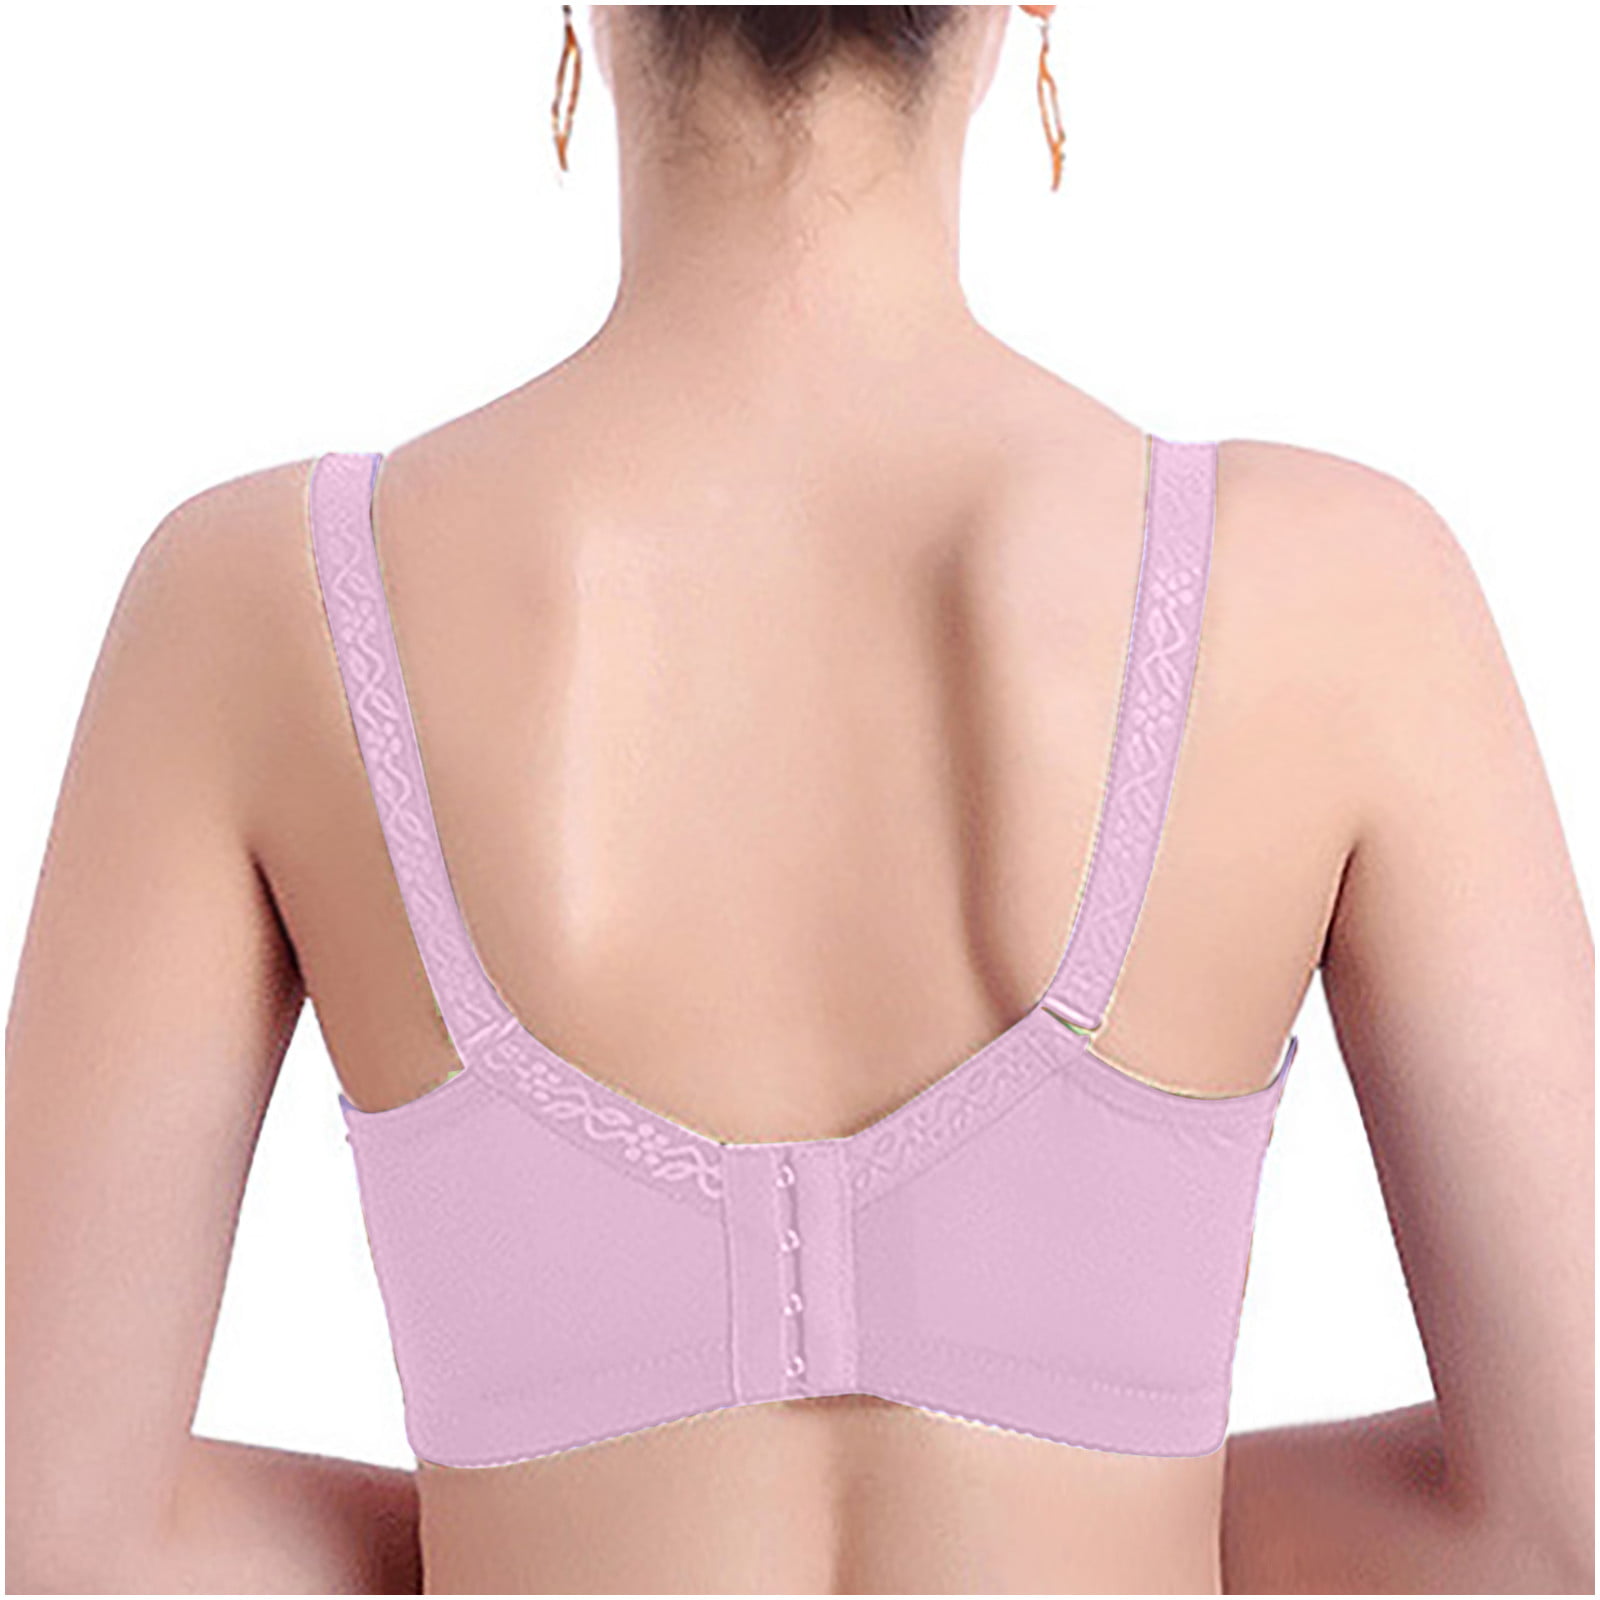 IROINNID Push-Up Bras For Women Solid Plus Size Underwire